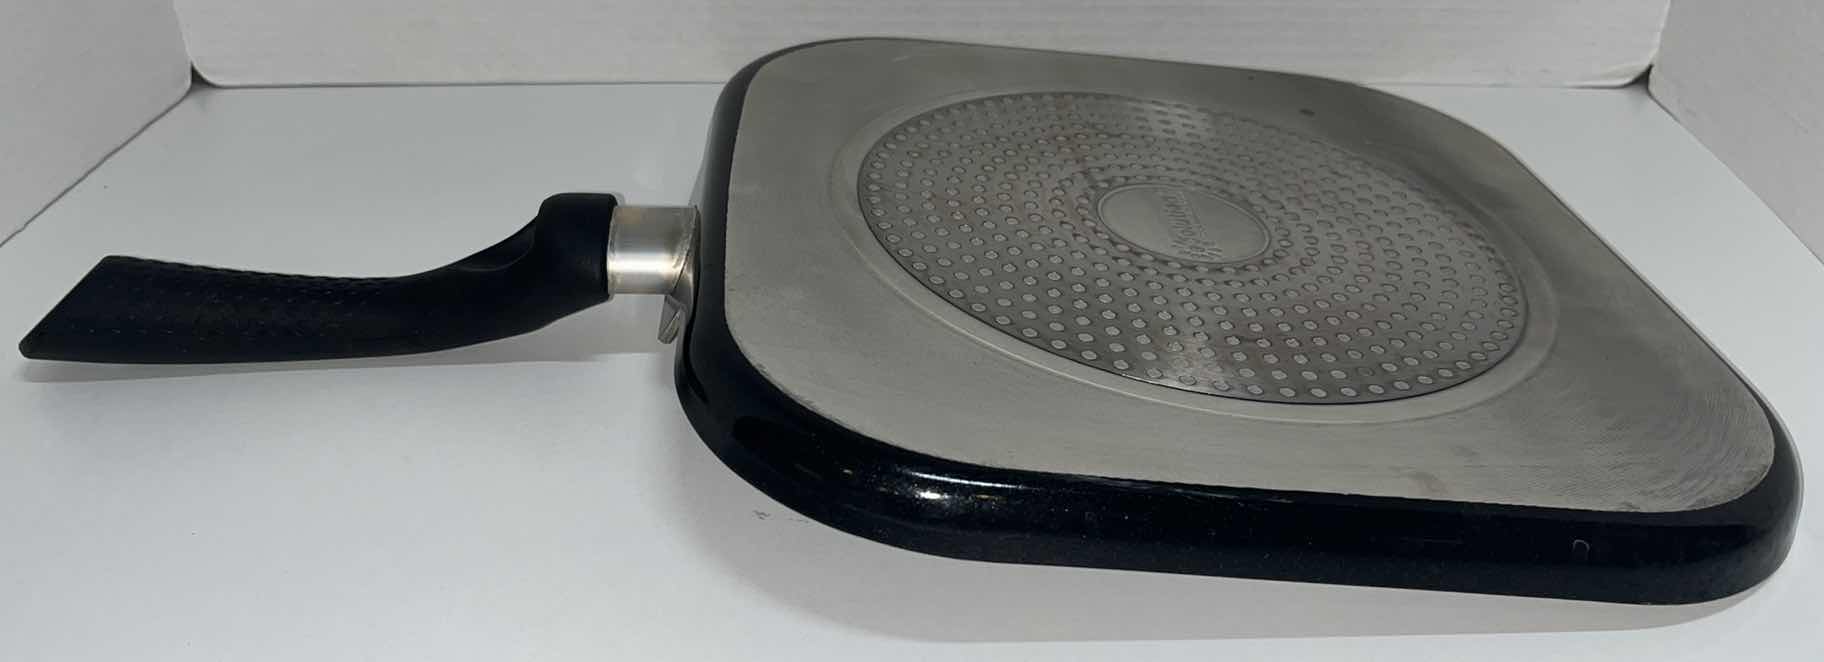 Photo 6 of PAMPERED CHEF 10.5” NON-STICK SQUARE GRILL PAN & ECOLUTION 11” SQUARE NON-STICK FLAT GRIDDLE PAN